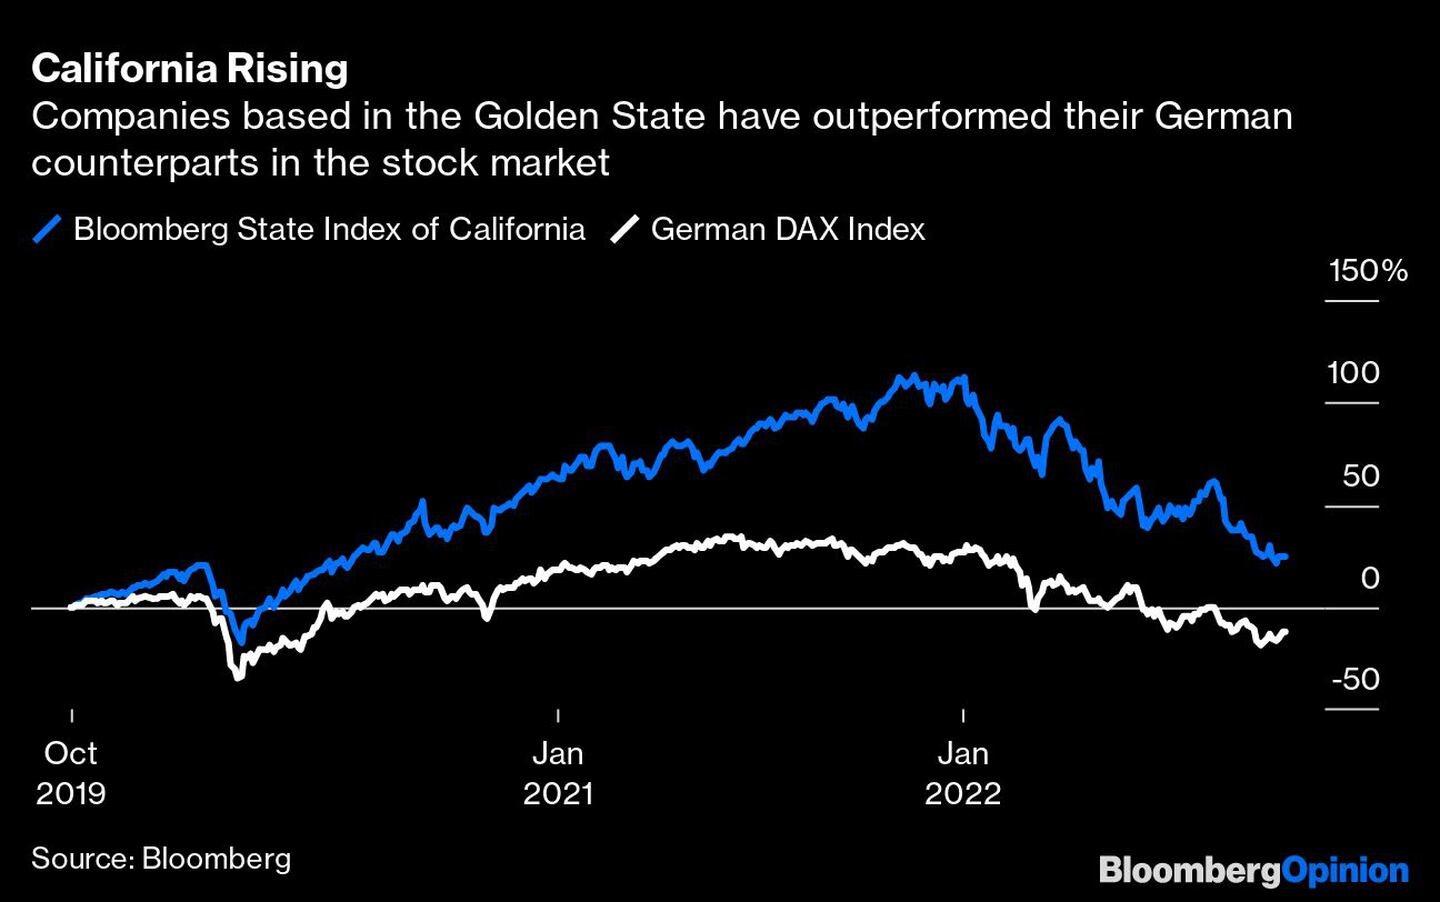 California Rising | Companies based in the Golden State have outperformed their German counterparts in the stock marketdfd